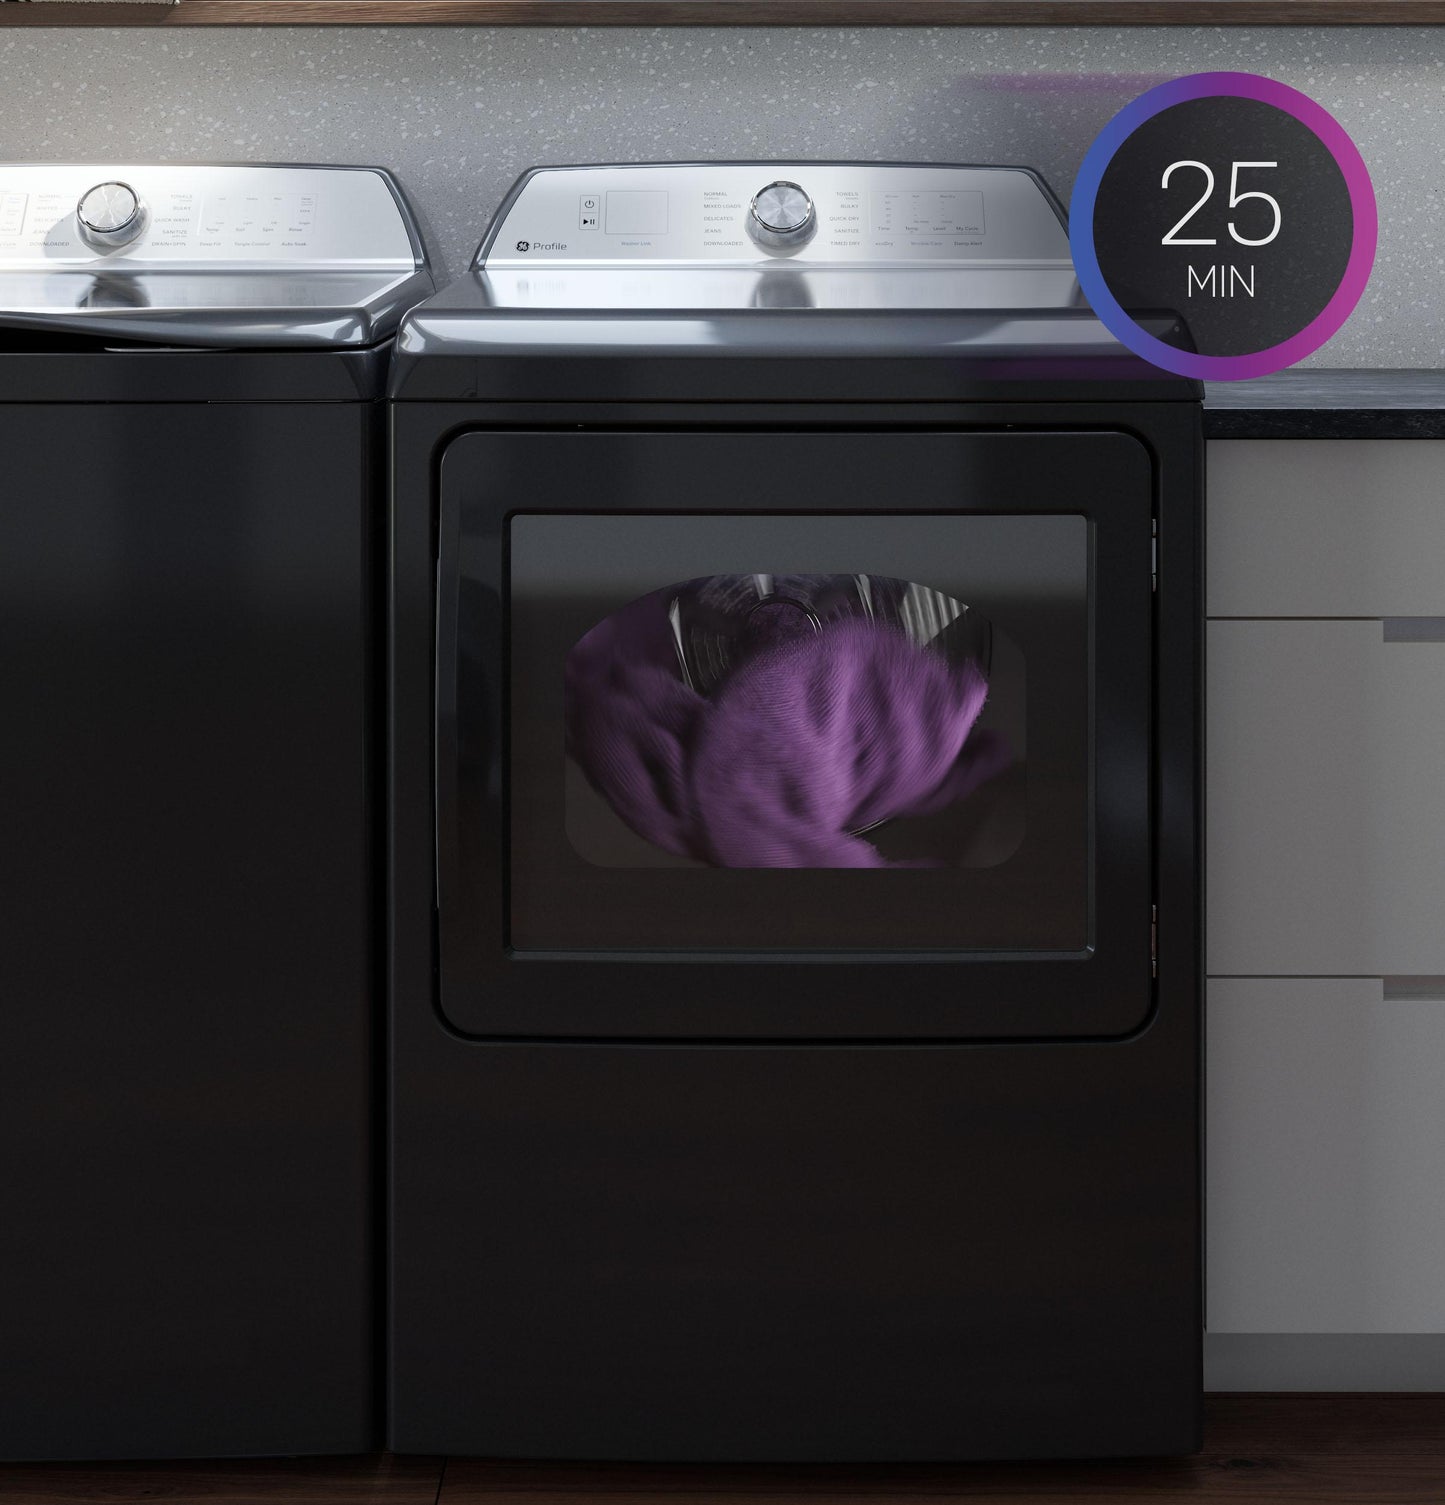 Ge Appliances PTD90EBPTRS Ge Profile&#8482; 7.3 Cu. Ft. Capacity Smart Electric Dryer With Fabric Refresh